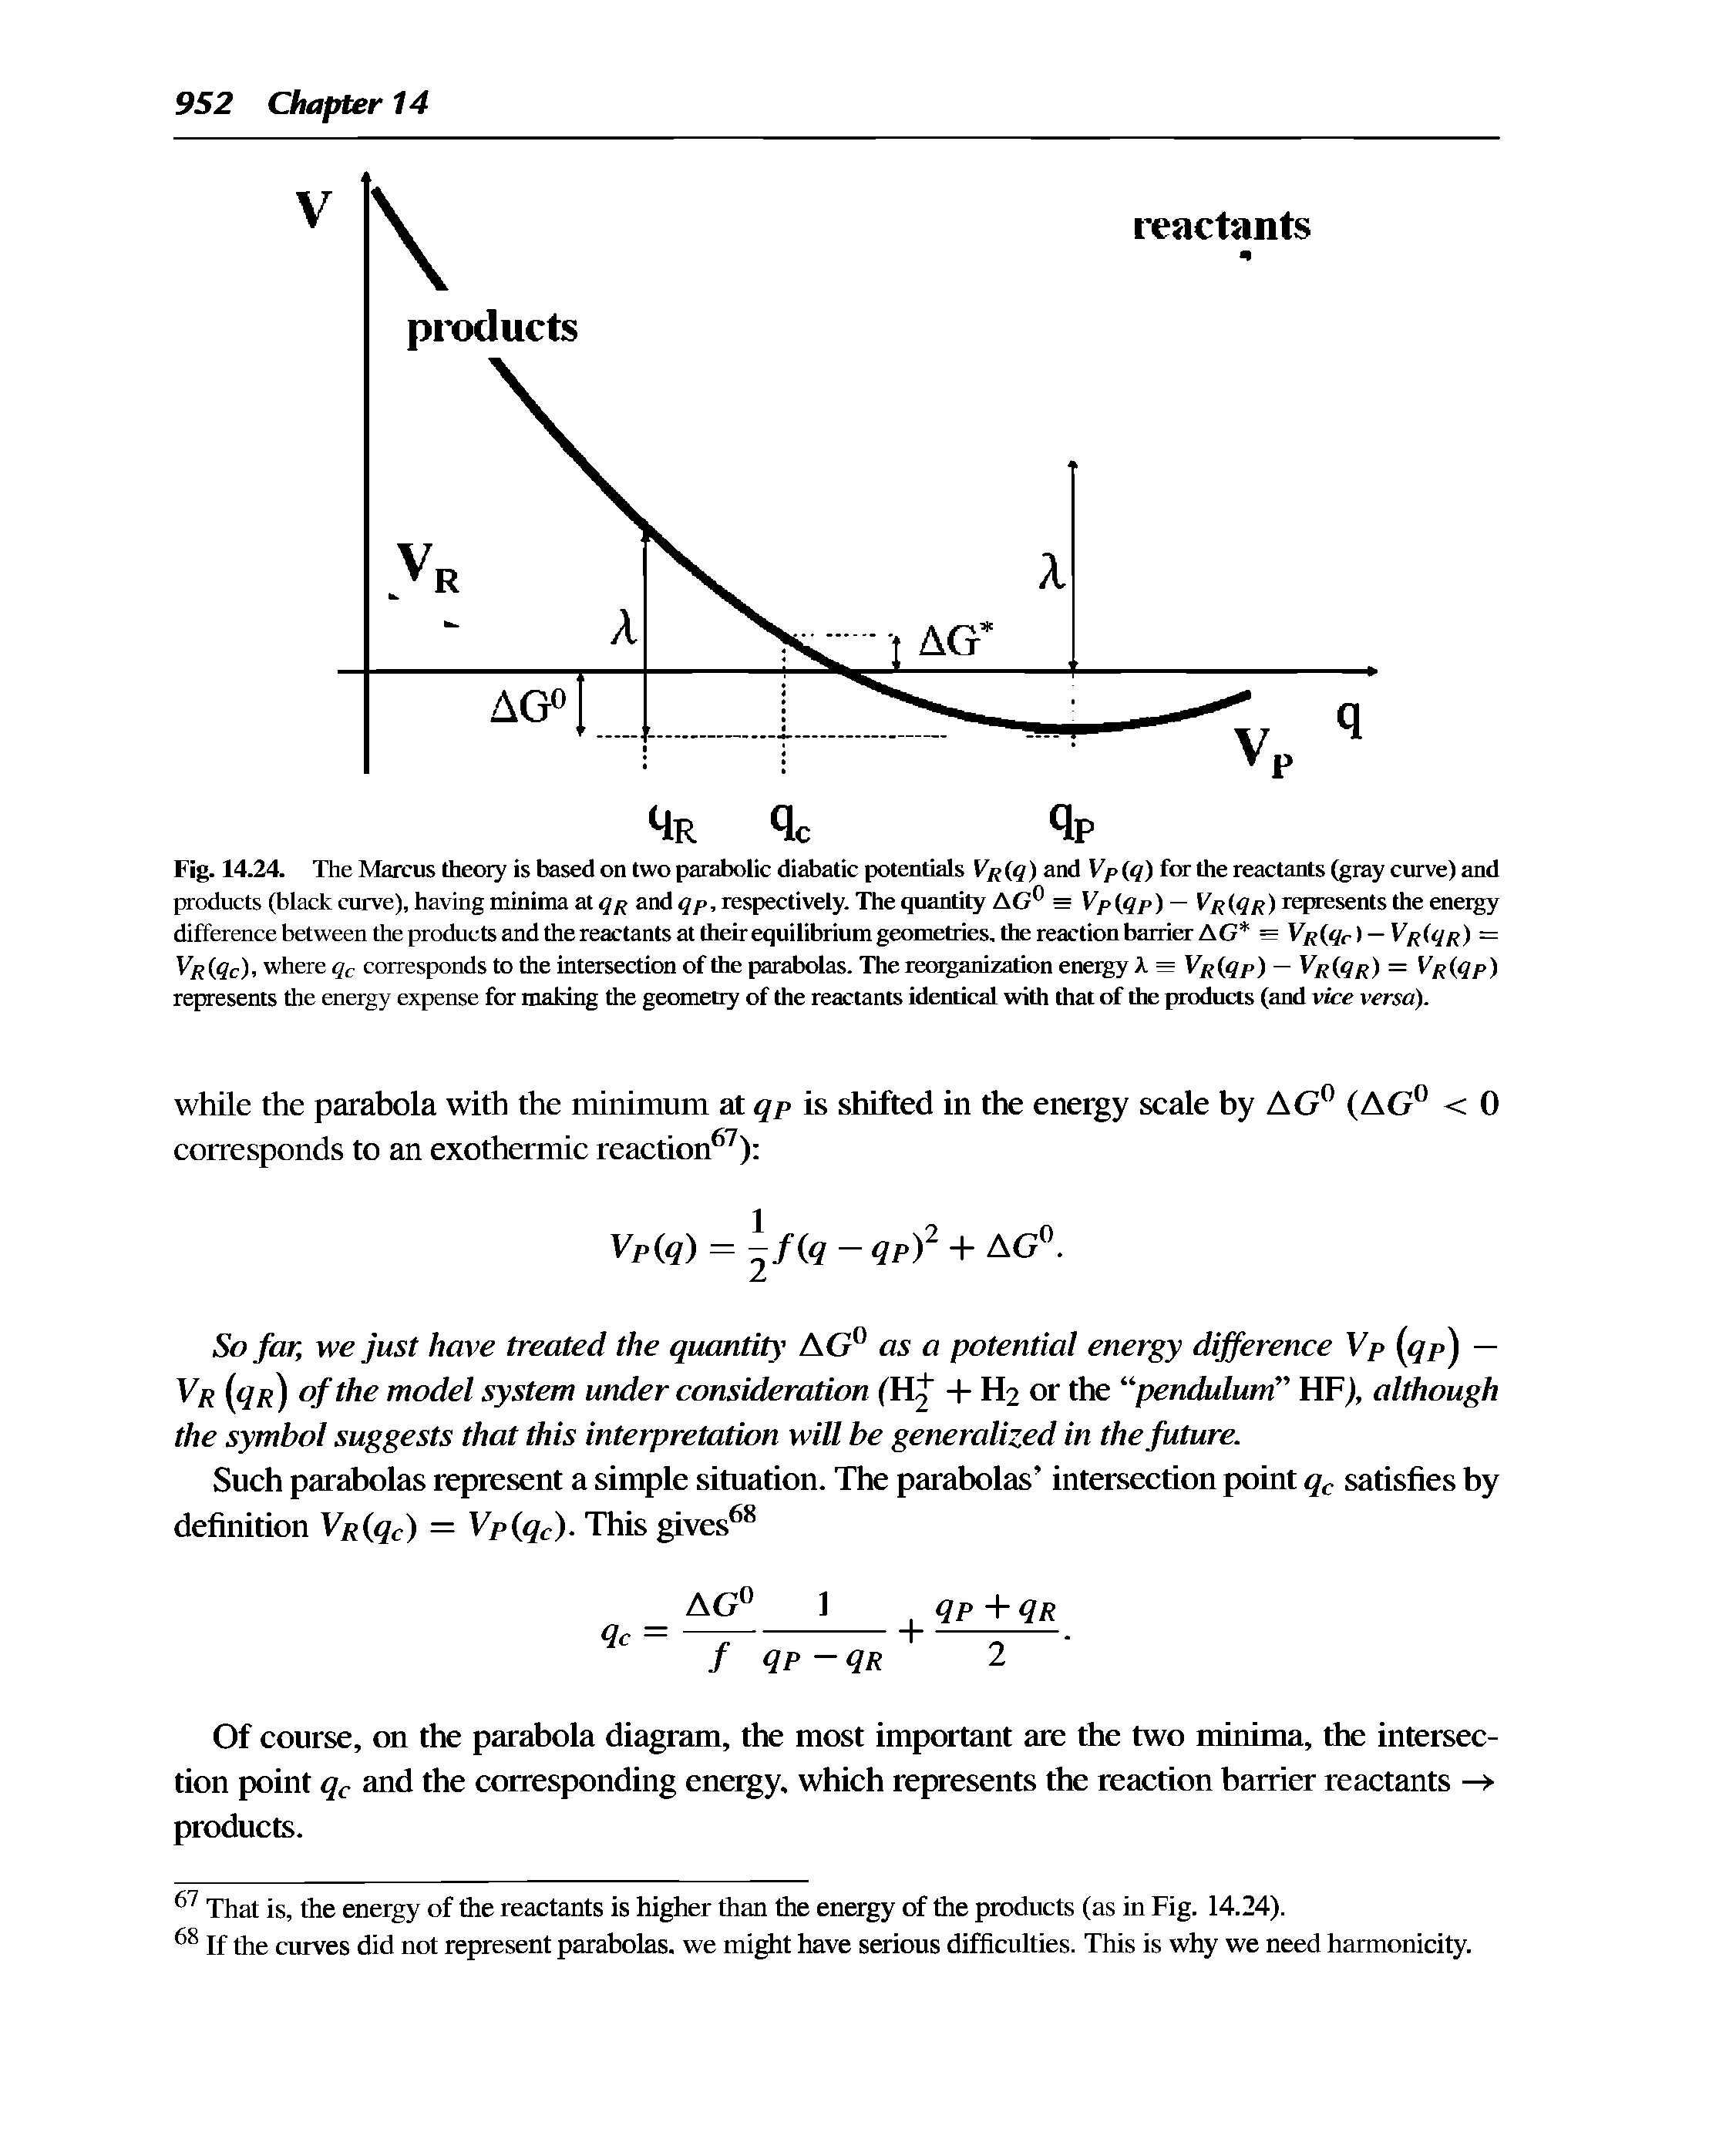 Fig. 14.24. The Marcus theory is based on two parabolic diabatic potentials (9) and V/> ( ) for the reactants (gray curve) and products (black curve), having minima at and <]p, respectively. The quantity AG = Vp(qp) — Vp(qp) represents the energy differencebetweentheproductsandthereactantsattheirequilibriumgeometries, the reaction barrier AG = Vp qc) — Vp(qp) = Vp(qc), where 5c corresponds to the intersection of the parabolas. The reotgarrization energy A = Vp qp) — Vp qp) = Vp(qp) represents the energy expense for makirrg the geometry of the reactants identical with that of the products (and vice versa).